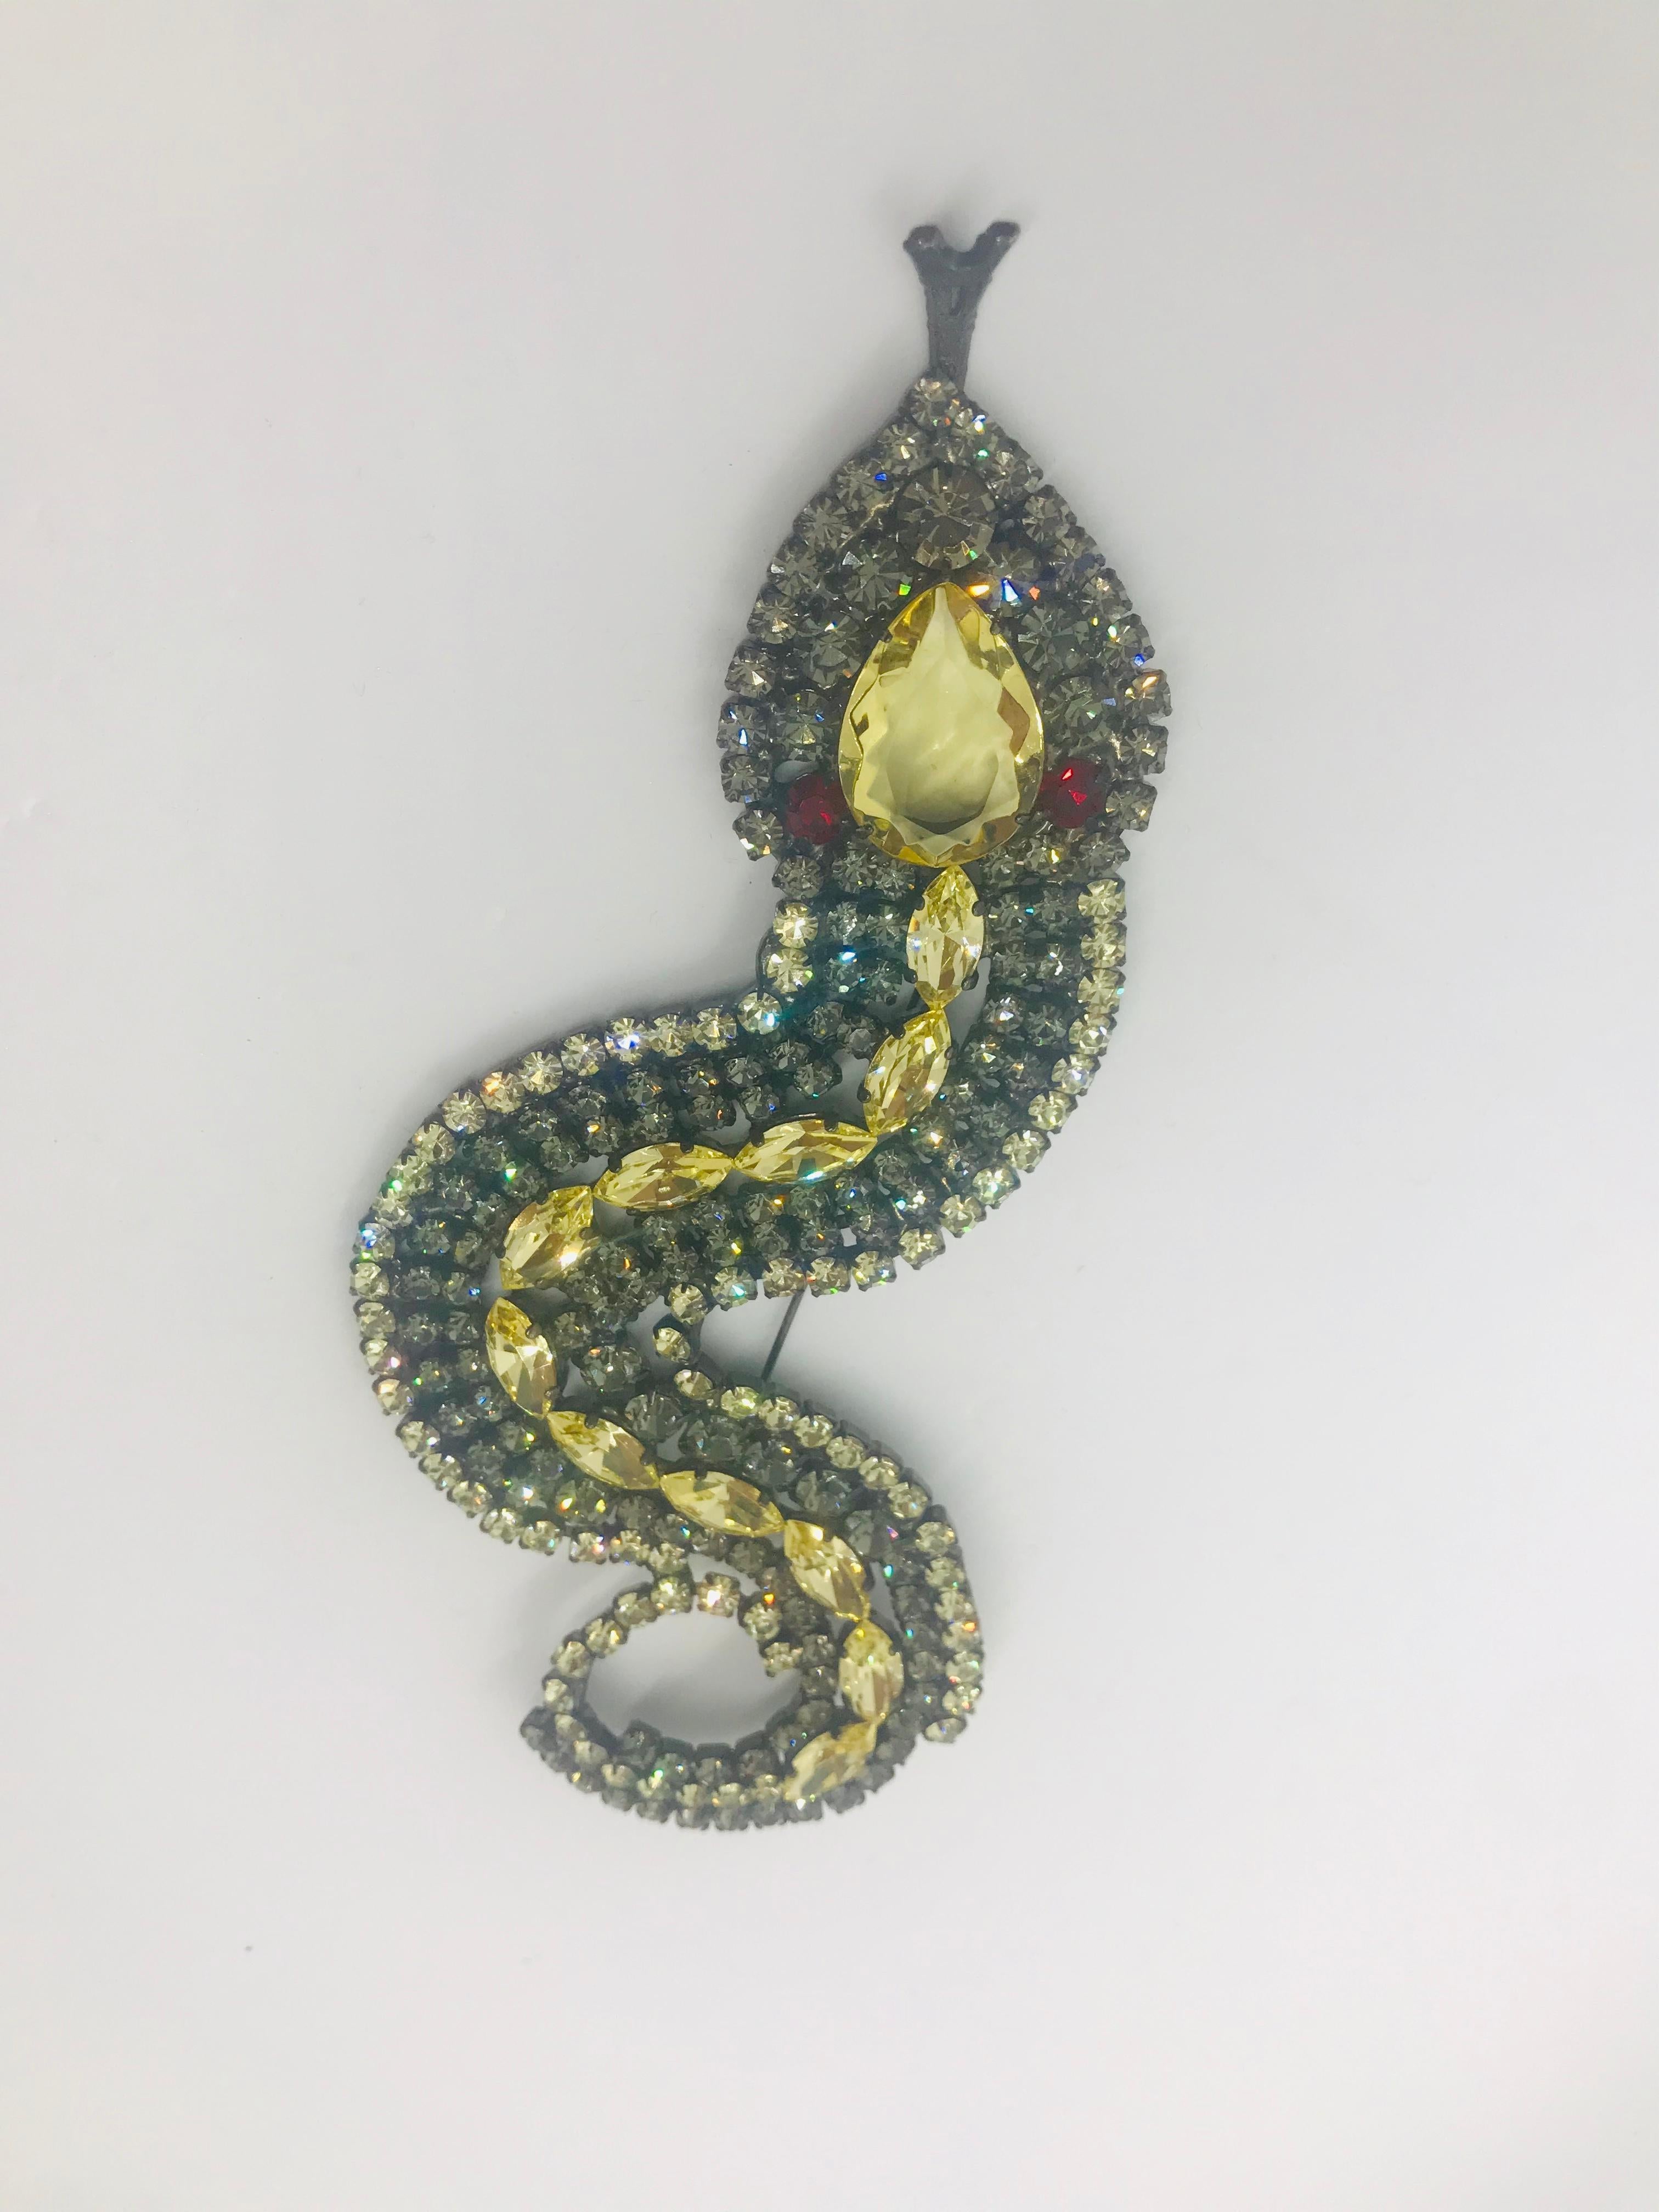 Historically snakes and serpents represent immortality and healing powers.  Our jonquil Czech and black diamond Austrian crystal snake brooch is reminiscent of Victorian snake jewelry.  This snake brooch features a large unfoiled Czech jonquil pear